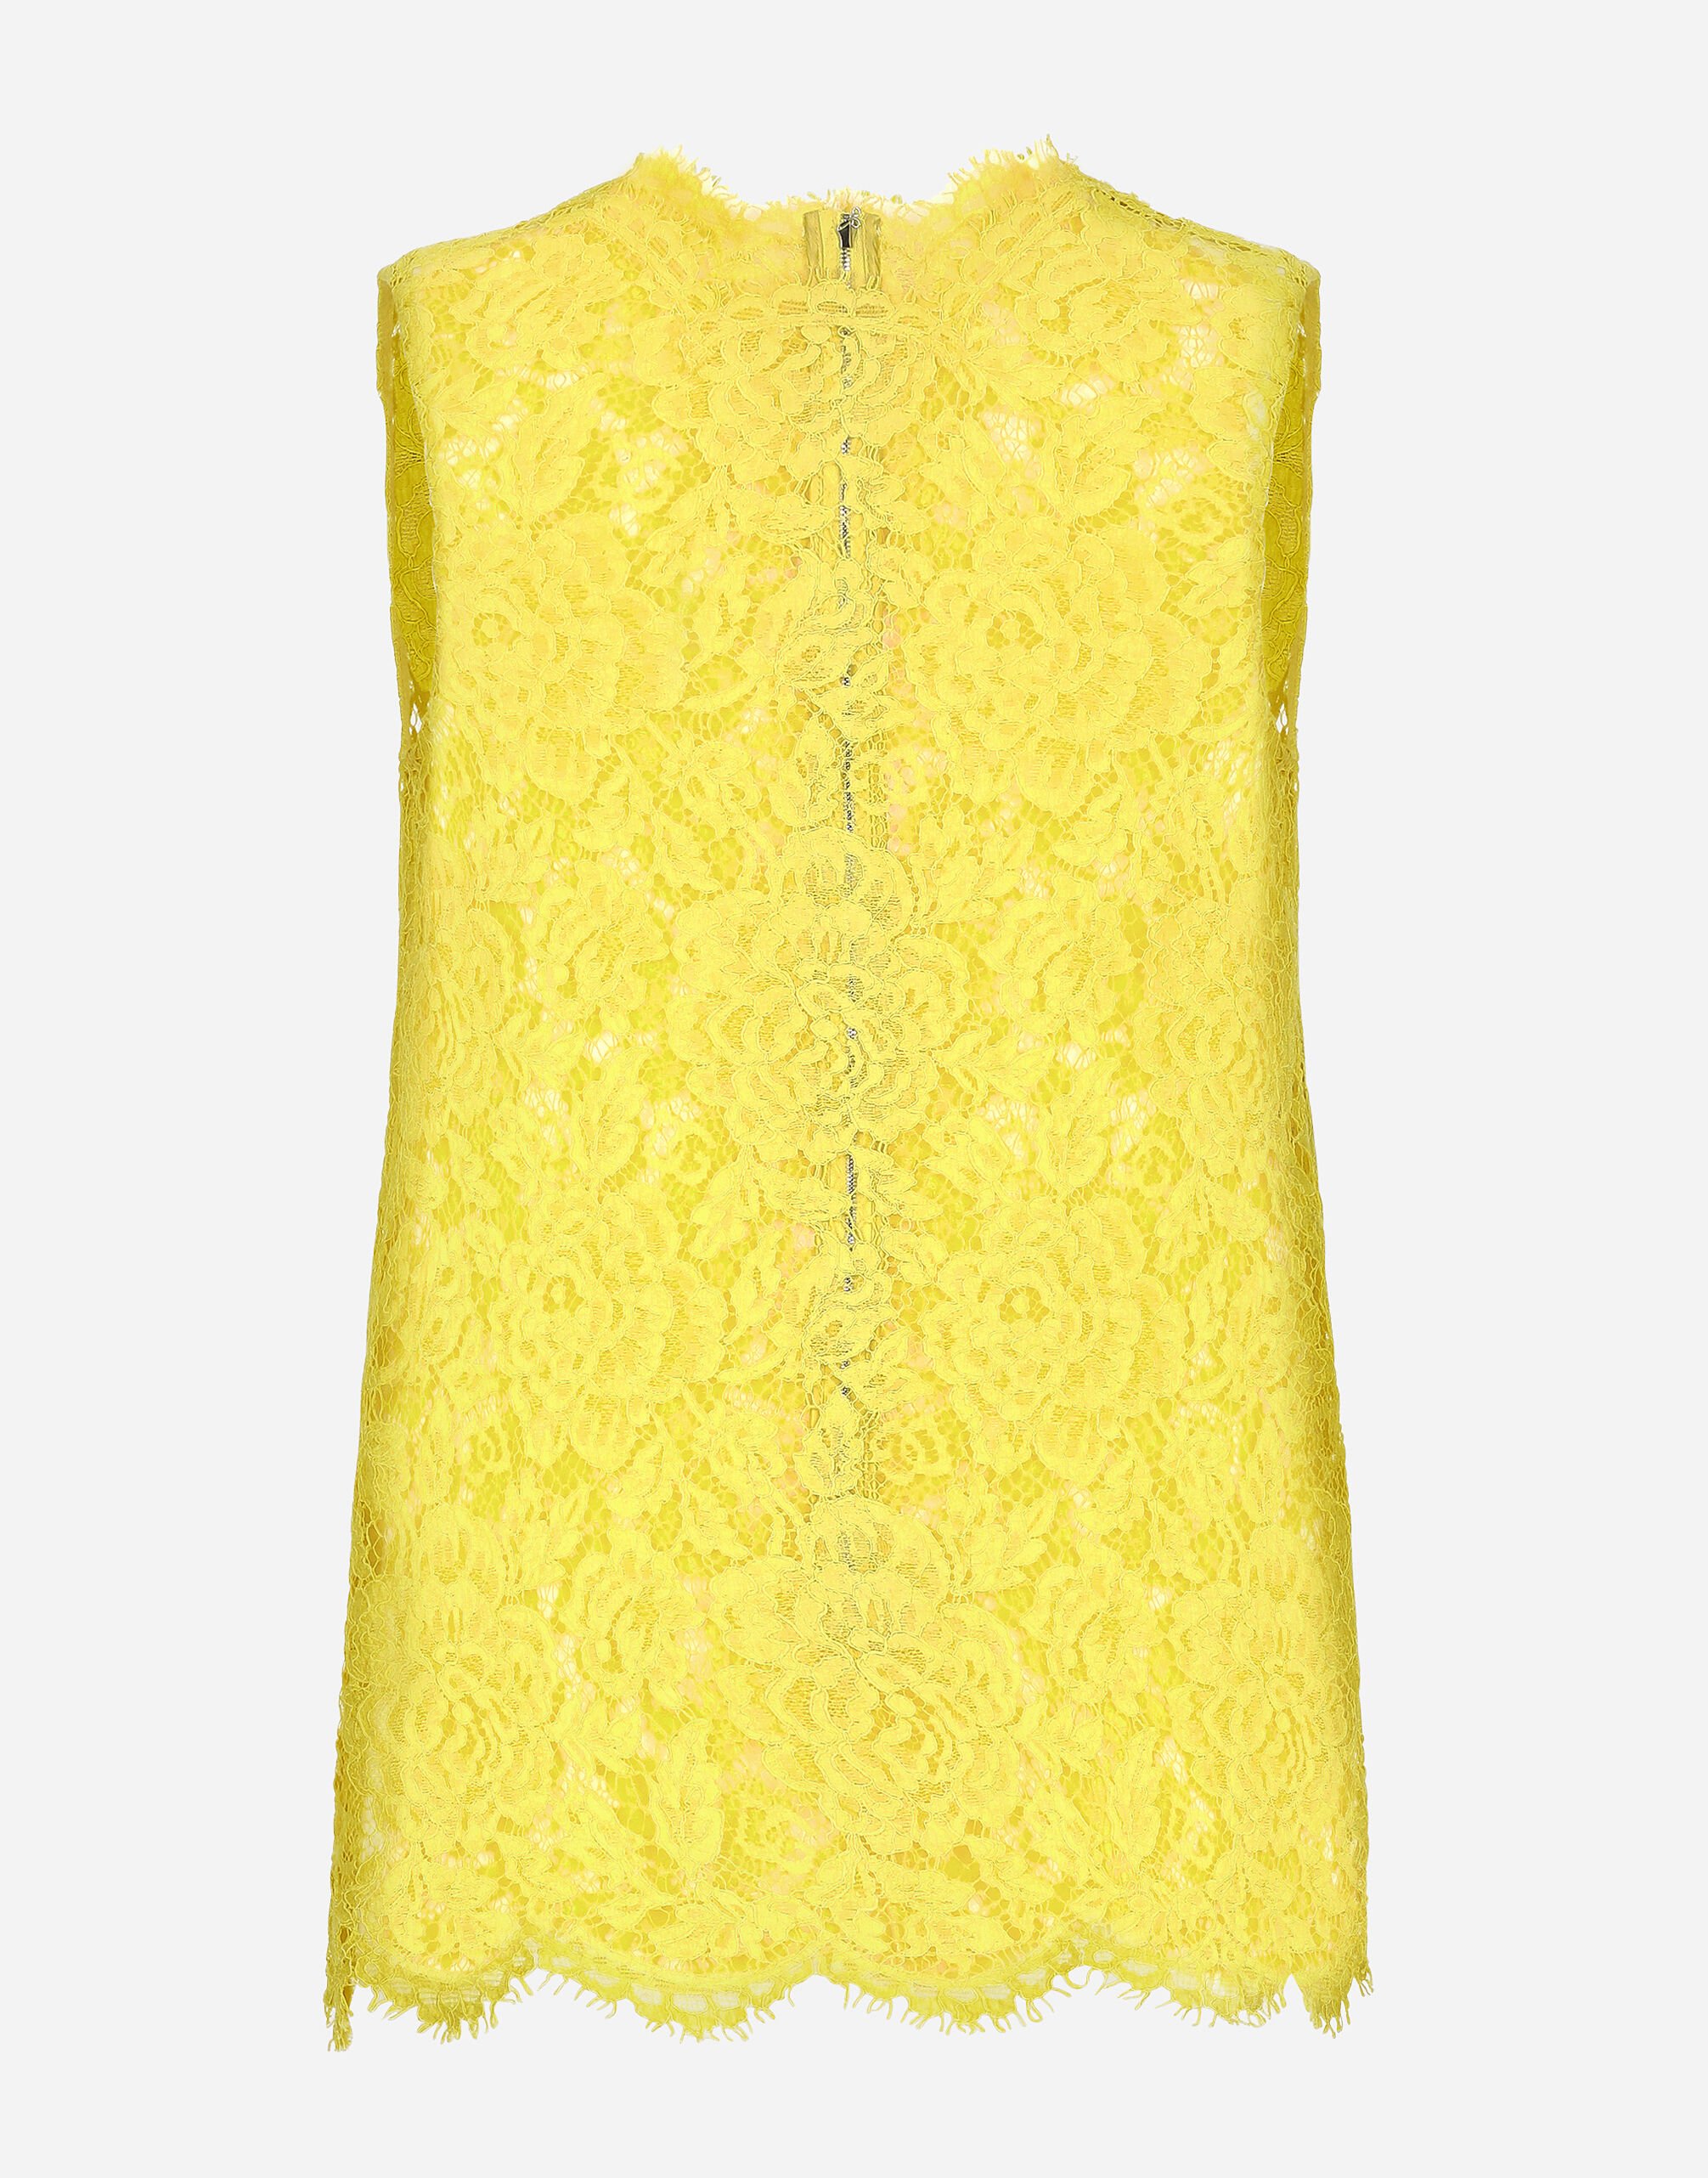 Dolce & Gabbana Branded floral cordonetto lace top Yellow F6UT1TFU5T9